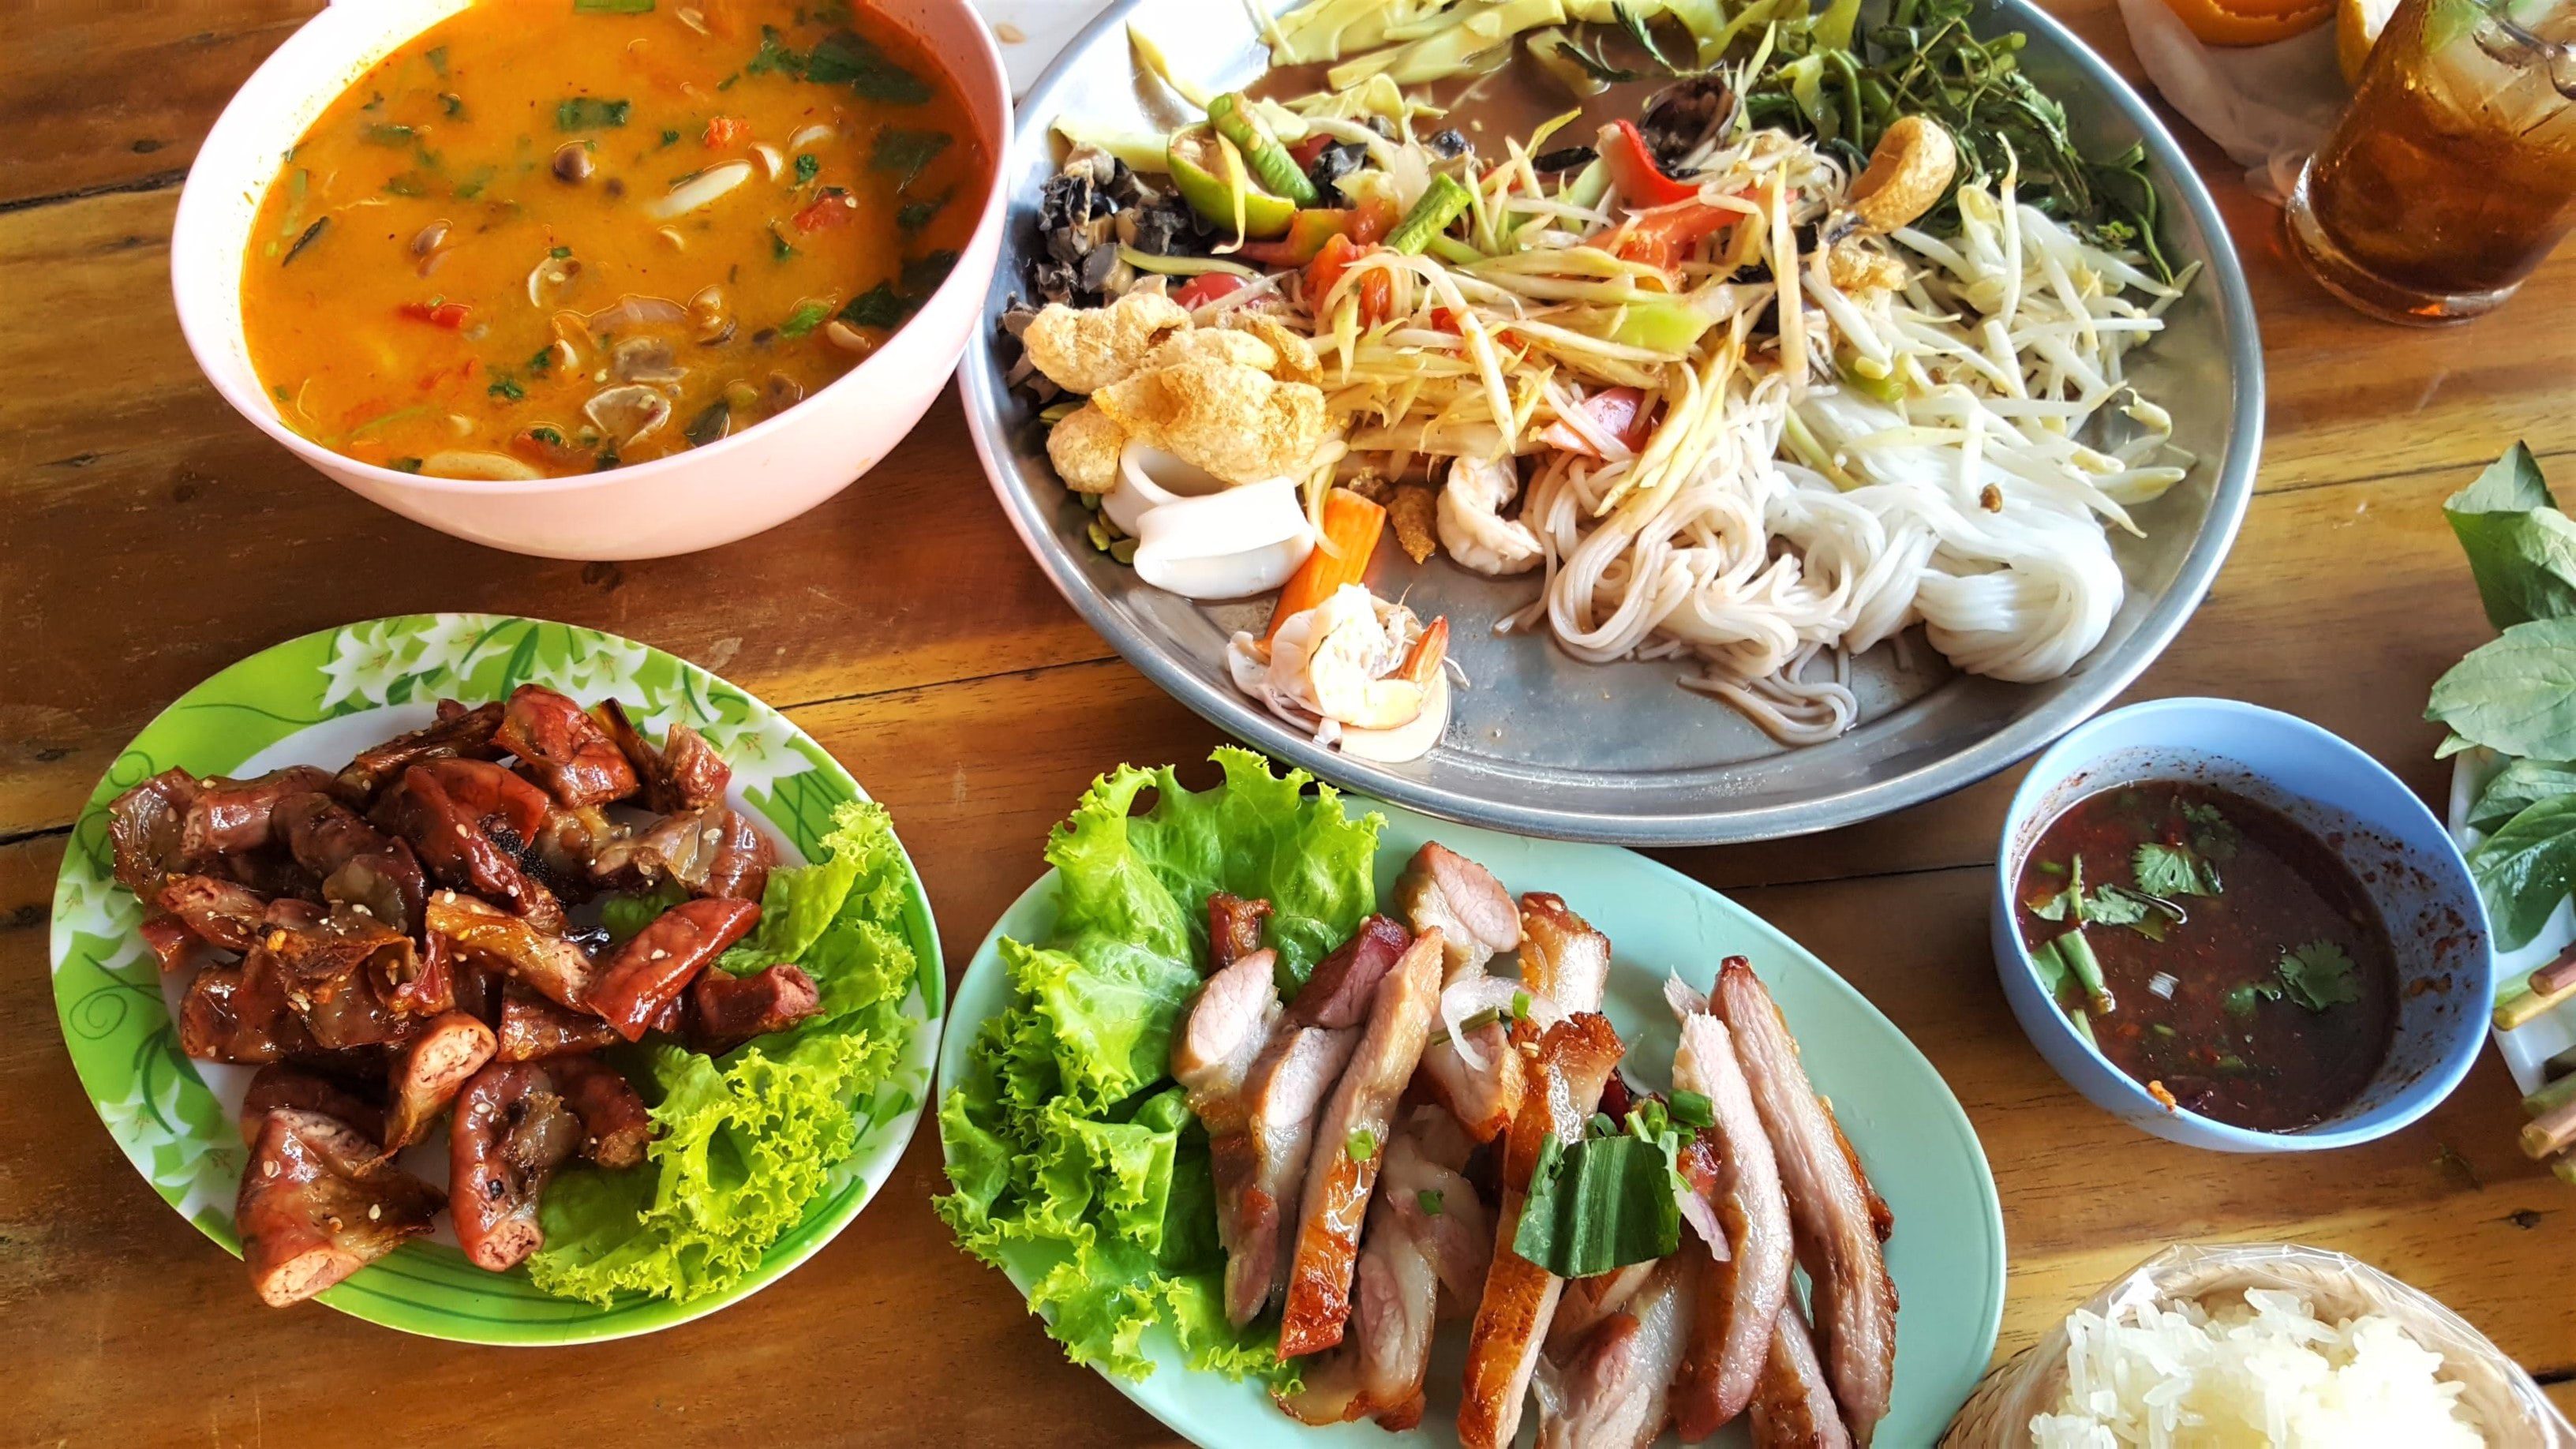 a spread of authentic kelowna thai food including curry, chicken and other dishes spread out on a table